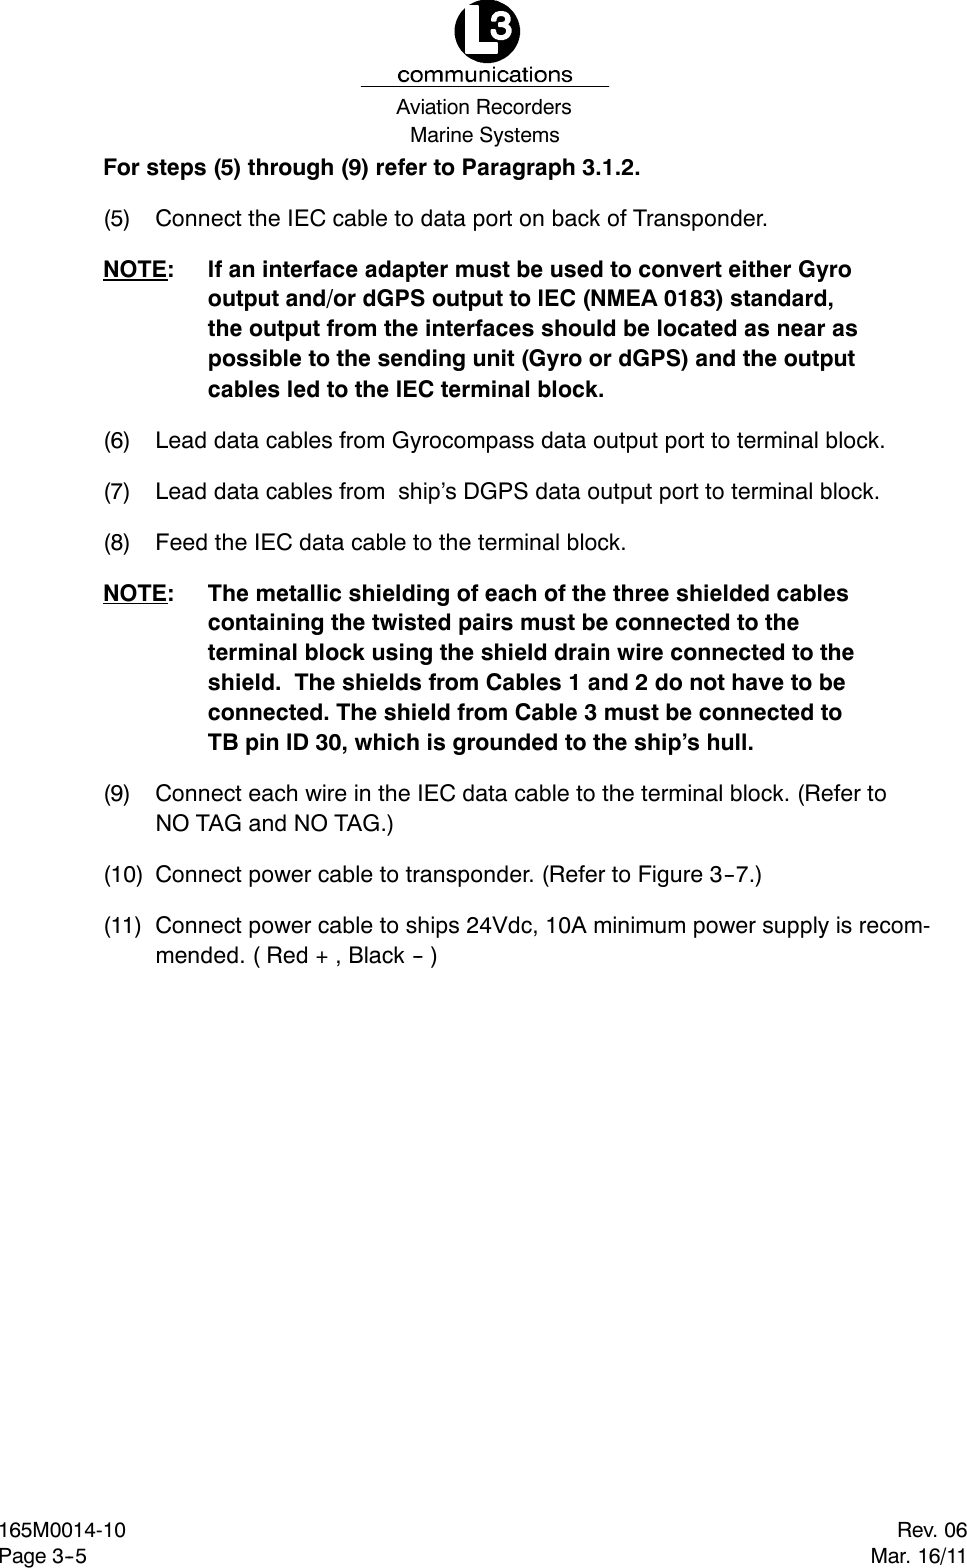 Marine SystemsAviation RecordersRev. 06Mar. 16/11165M0014-10Page 3--5For steps (5) through (9) refer to Paragraph 3.1.2.(5) Connect the IEC cable to data port on back of Transponder.NOTE: If an interface adapter must be used to convert either Gyrooutput and/or dGPS output to IEC (NMEA 0183) standard,the output from the interfaces should be located as near aspossible to the sending unit (Gyro or dGPS) and the outputcables led to the IEC terminal block.(6) Lead data cables from Gyrocompass data output port to terminal block.(7) Lead data cables from ship’s DGPS data output port to terminal block.(8) Feed the IEC data cable to the terminal block.NOTE: The metallic shielding of each of the three shielded cablescontaining the twisted pairs must be connected to theterminal block using the shield drain wire connected to theshield. The shields from Cables 1 and 2 do not have to beconnected. The shield from Cable 3 must be connected toTB pin ID 30, which is grounded to the ship’s hull.(9) Connect each wire in the IEC data cable to the terminal block. (Refer toNO TAG and NO TAG.)(10) Connect power cable to transponder. (Refer to Figure 3--7.)(11) Connect power cable to ships 24Vdc, 10A minimum power supply is recom-mended. ( Red + , Black -- )